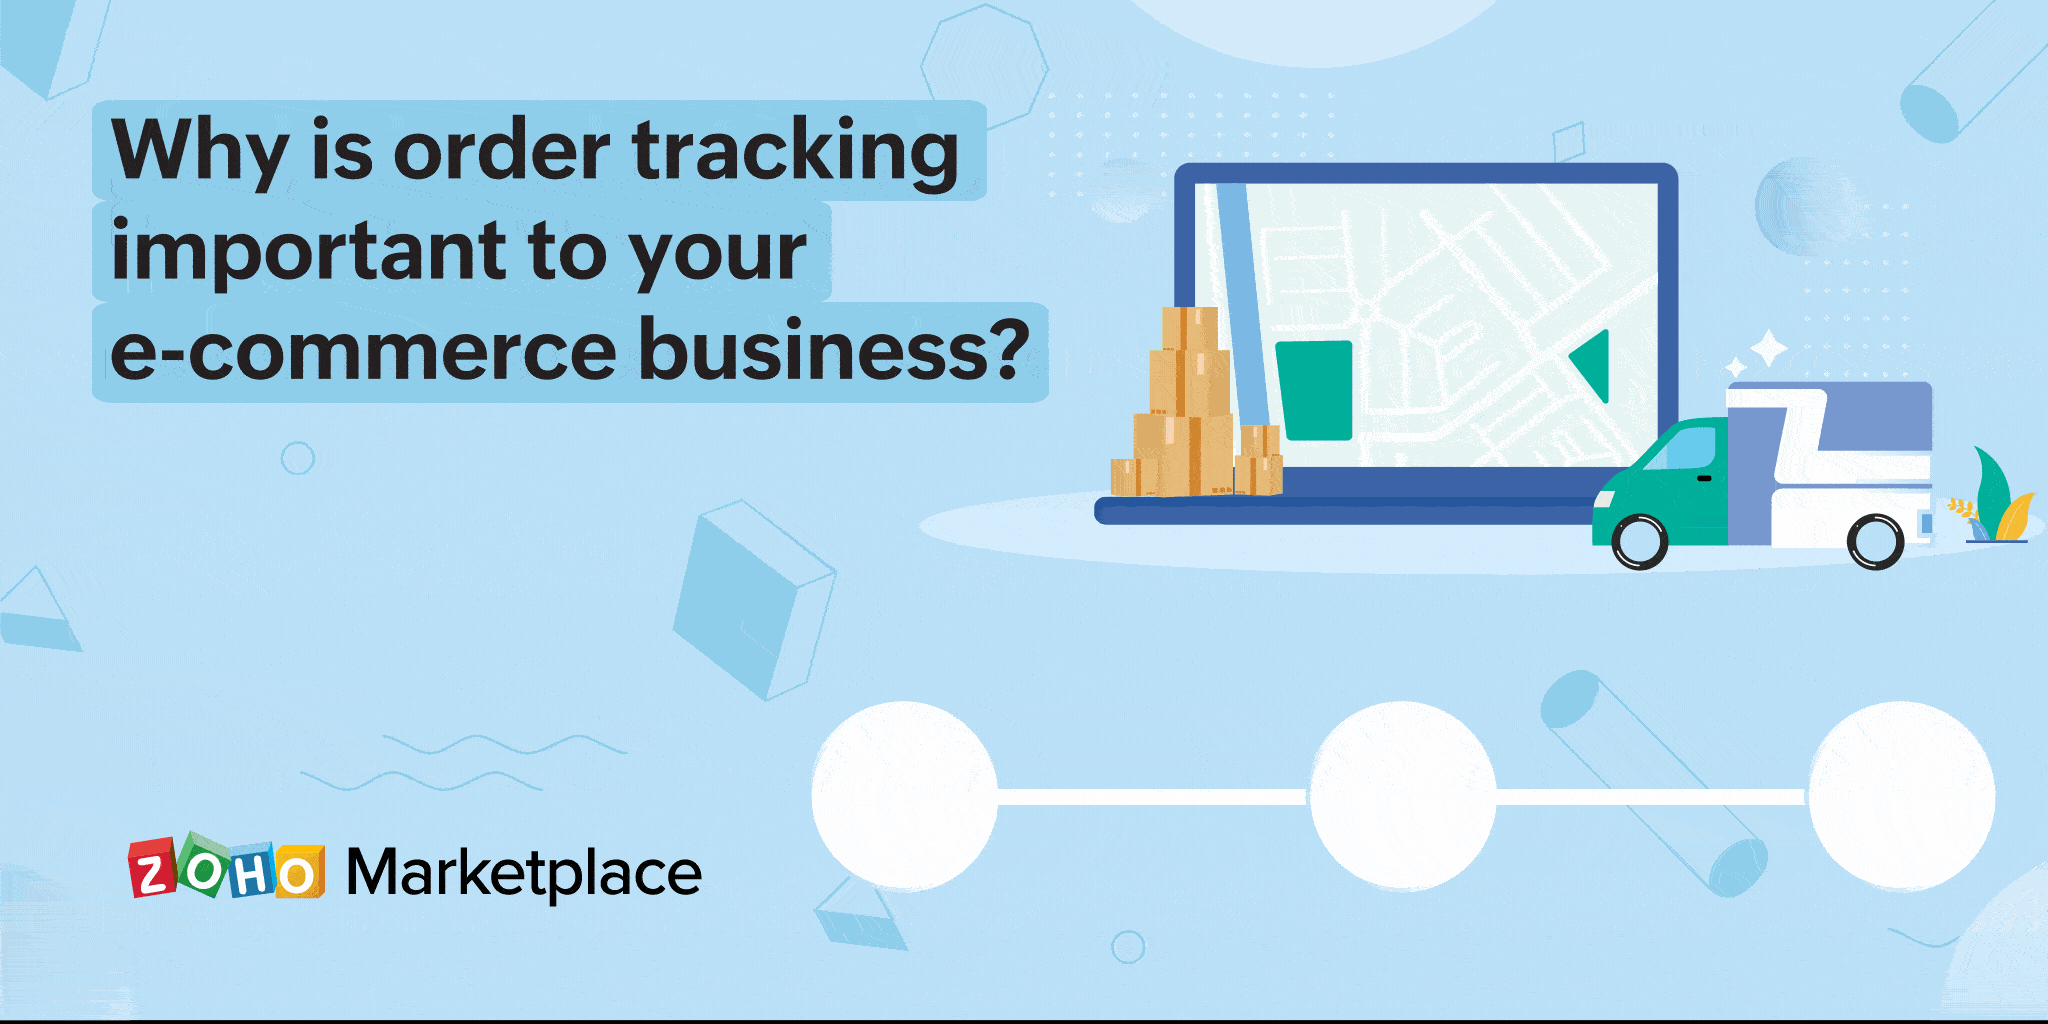 Why is order tracking important to your e-commerce business?